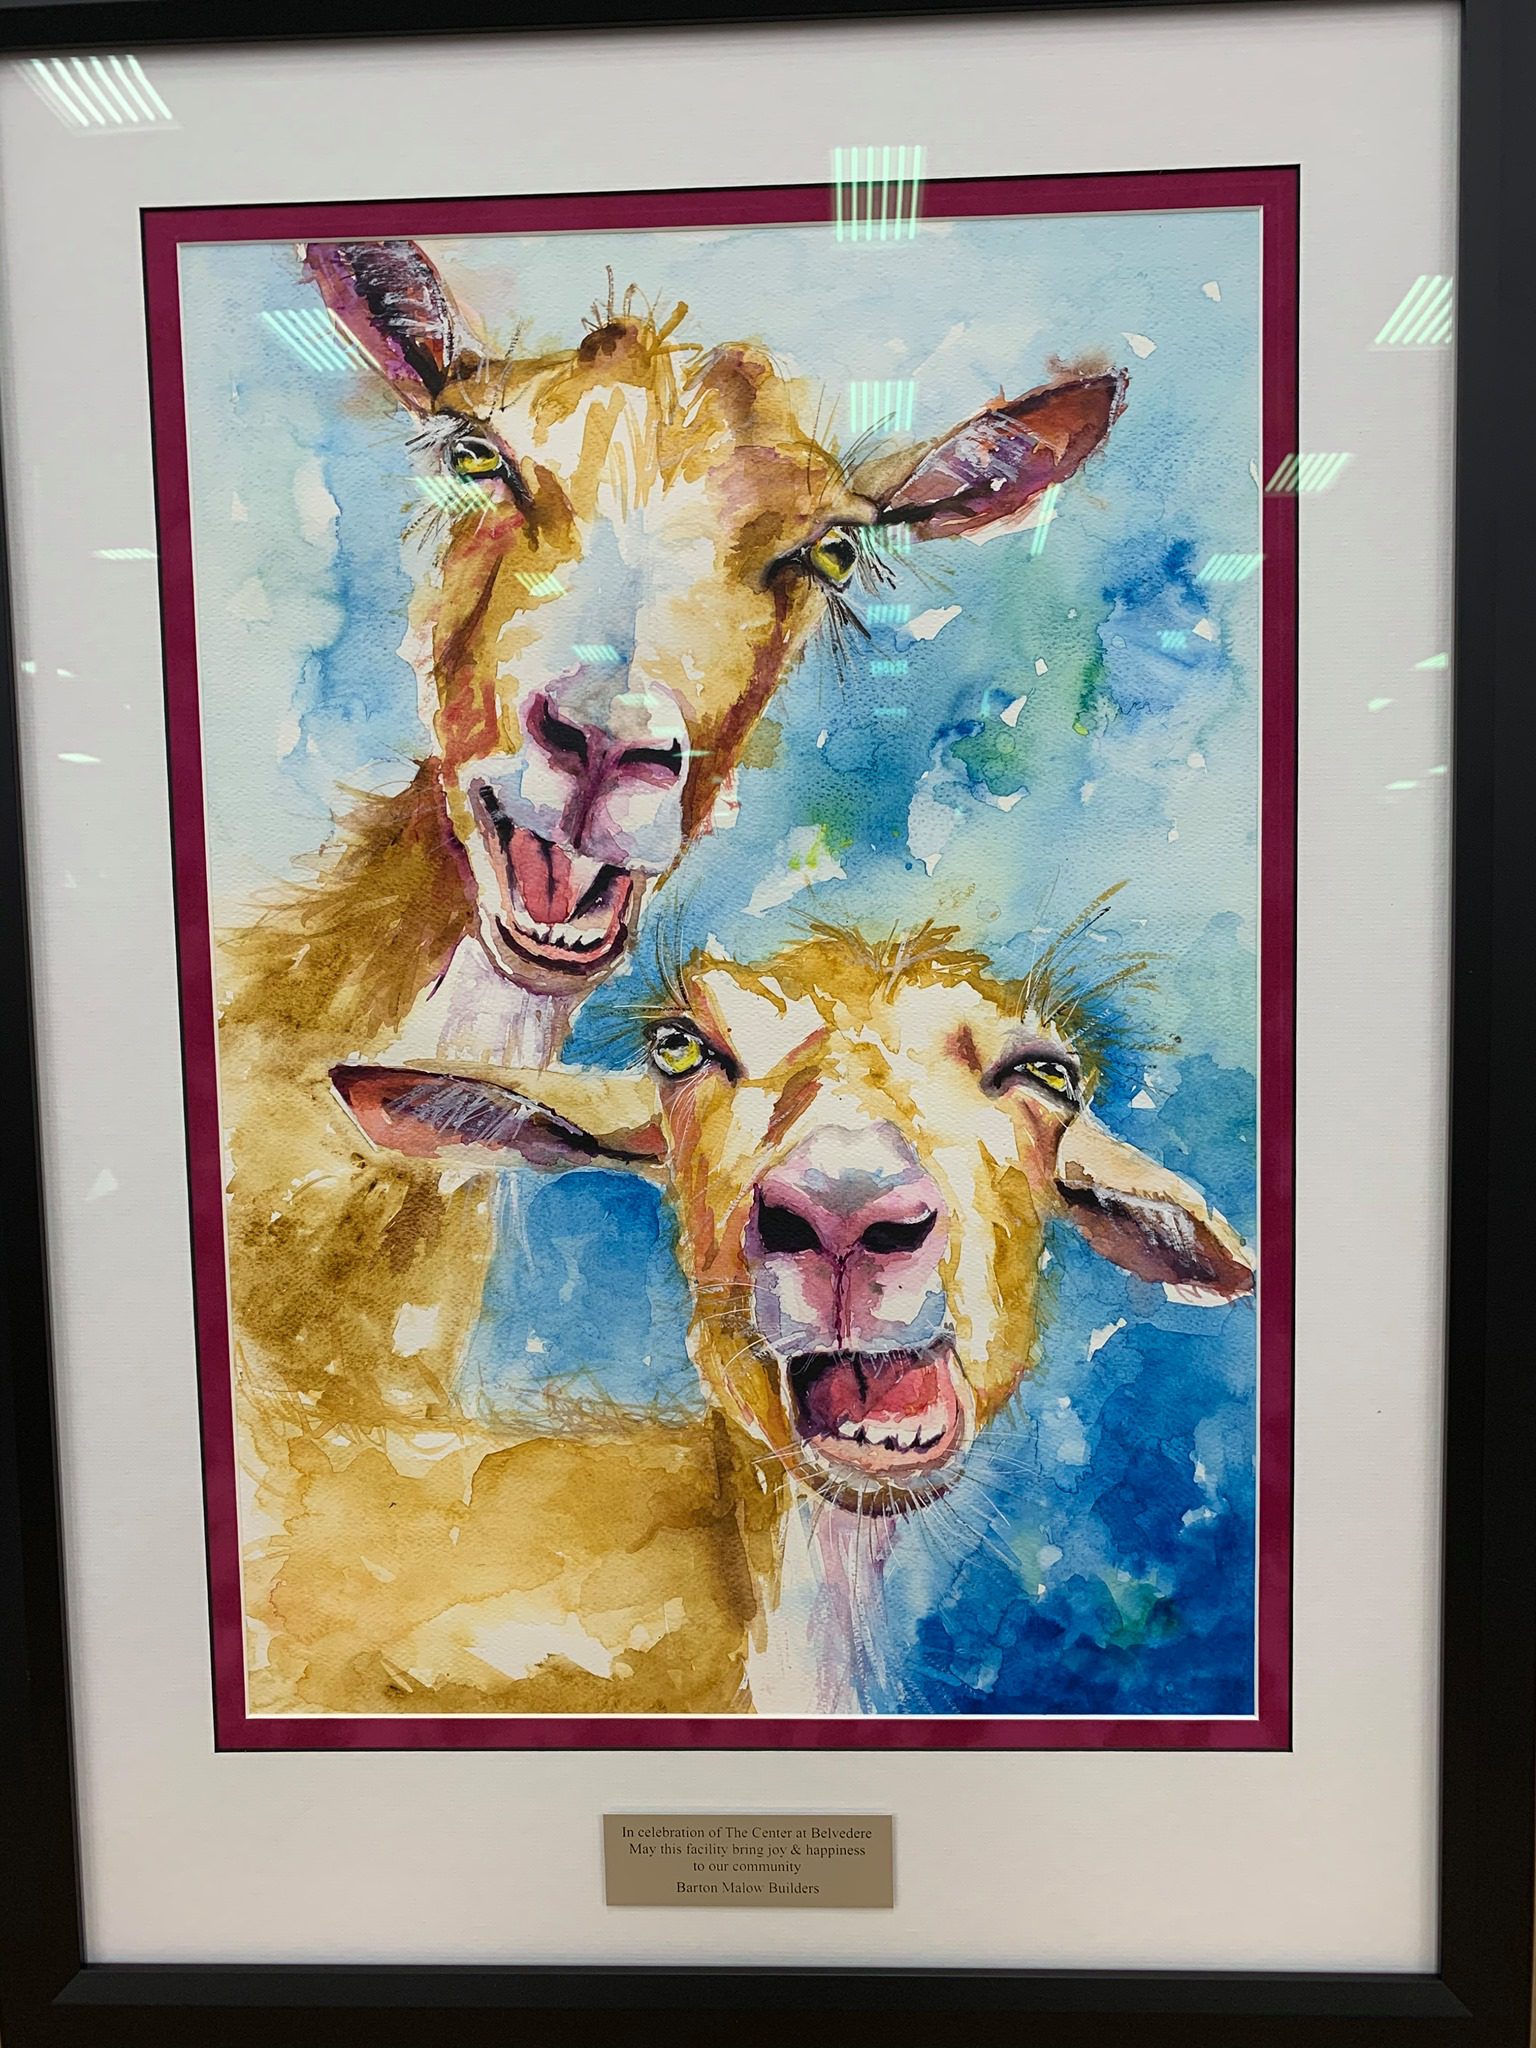 Barton Malow gifted a goat painting to memorialize the sustainable land clearing accomplished by the goats.